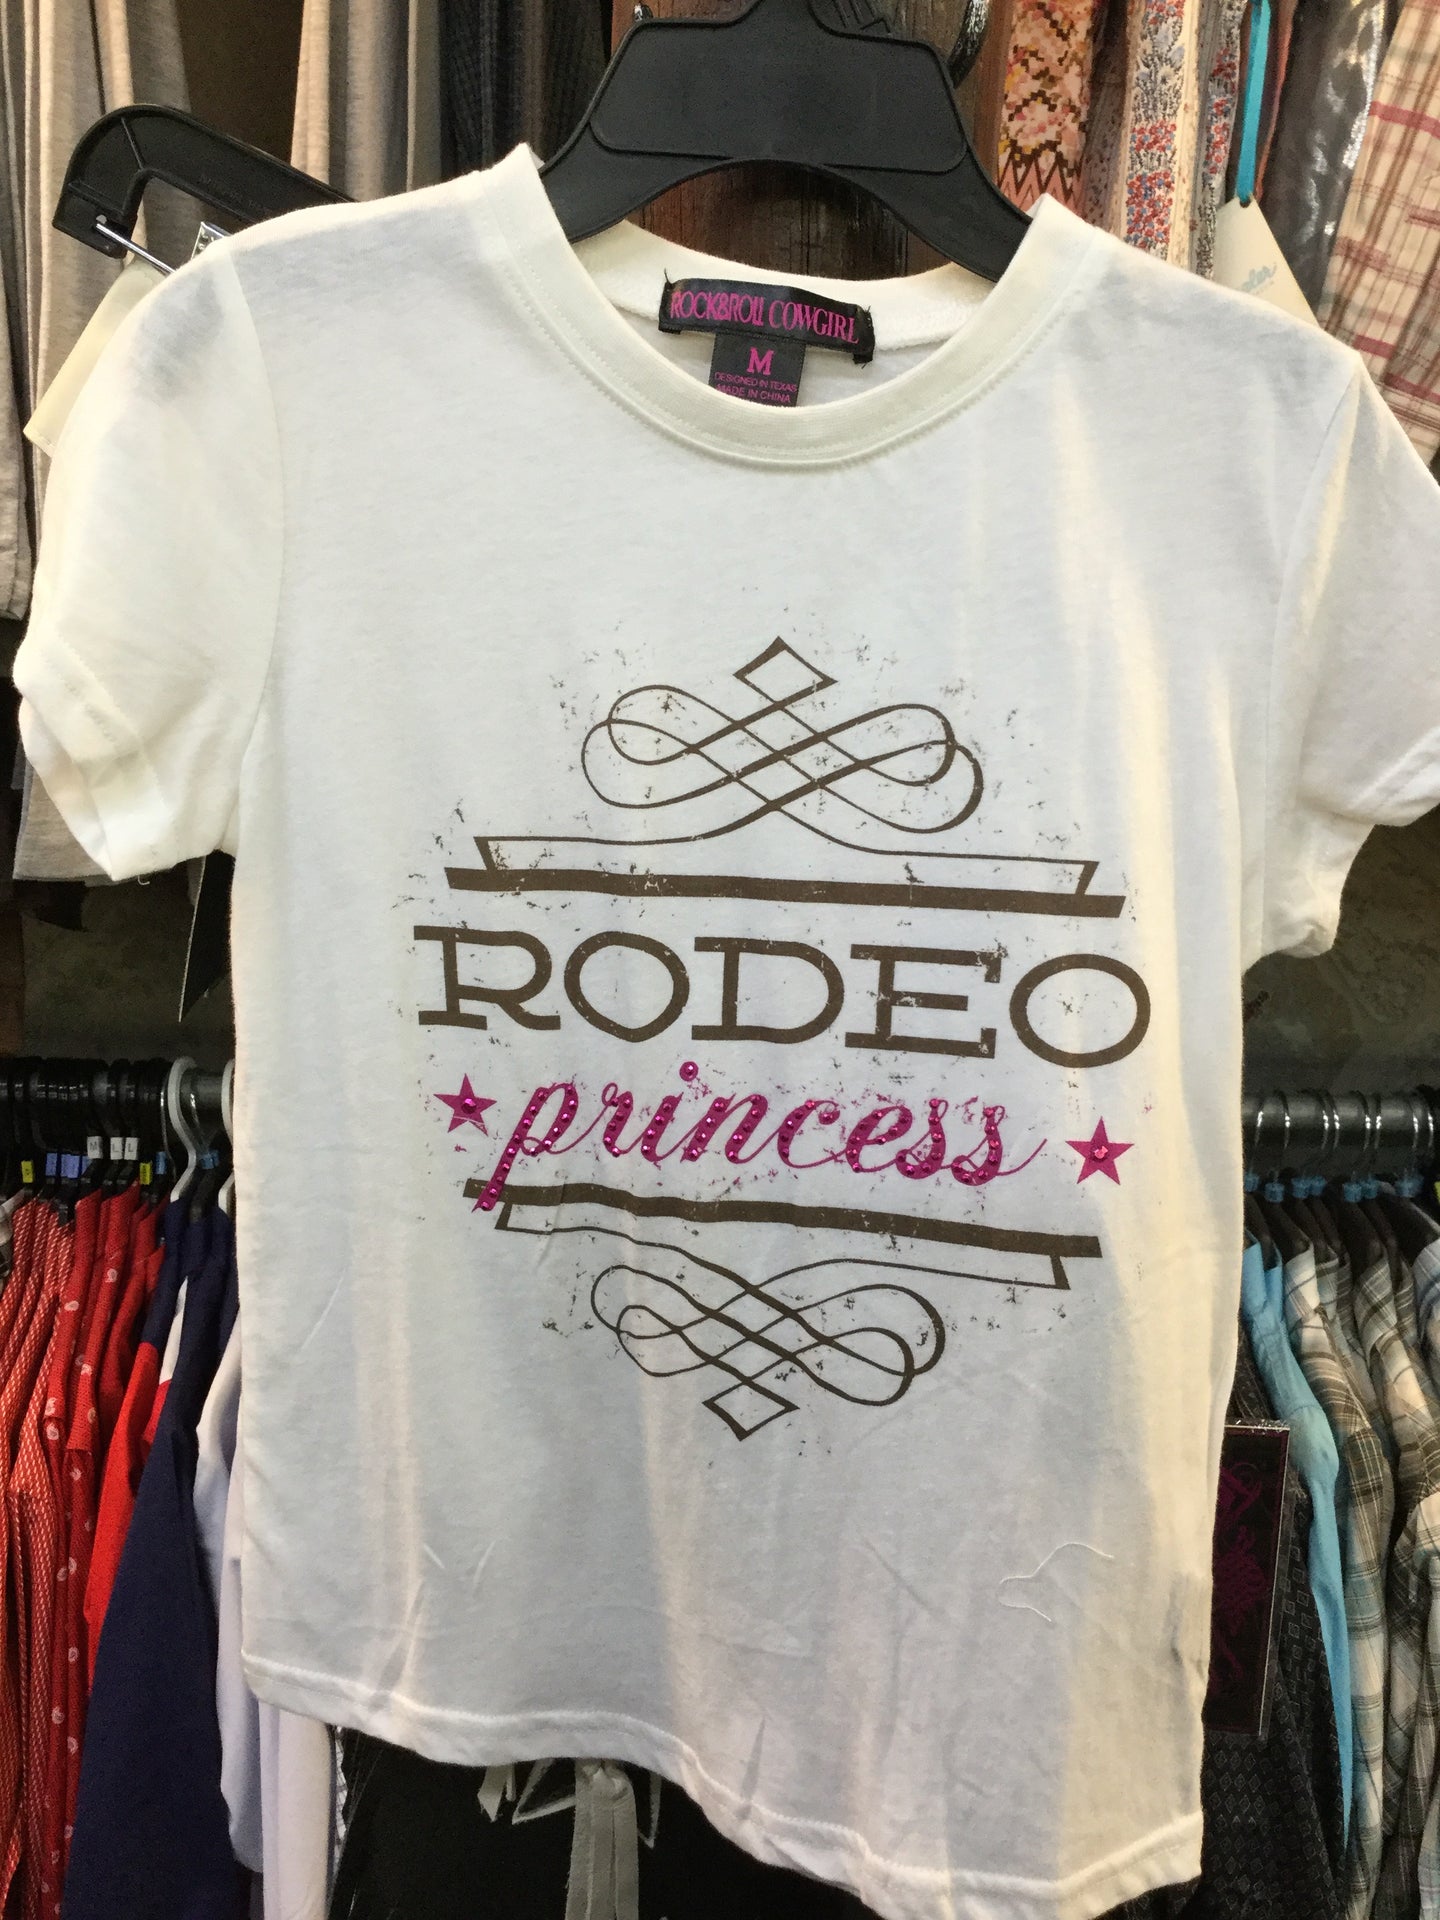 Rock & Roll Cowgirl Rodeo Princess Tee G3T2425